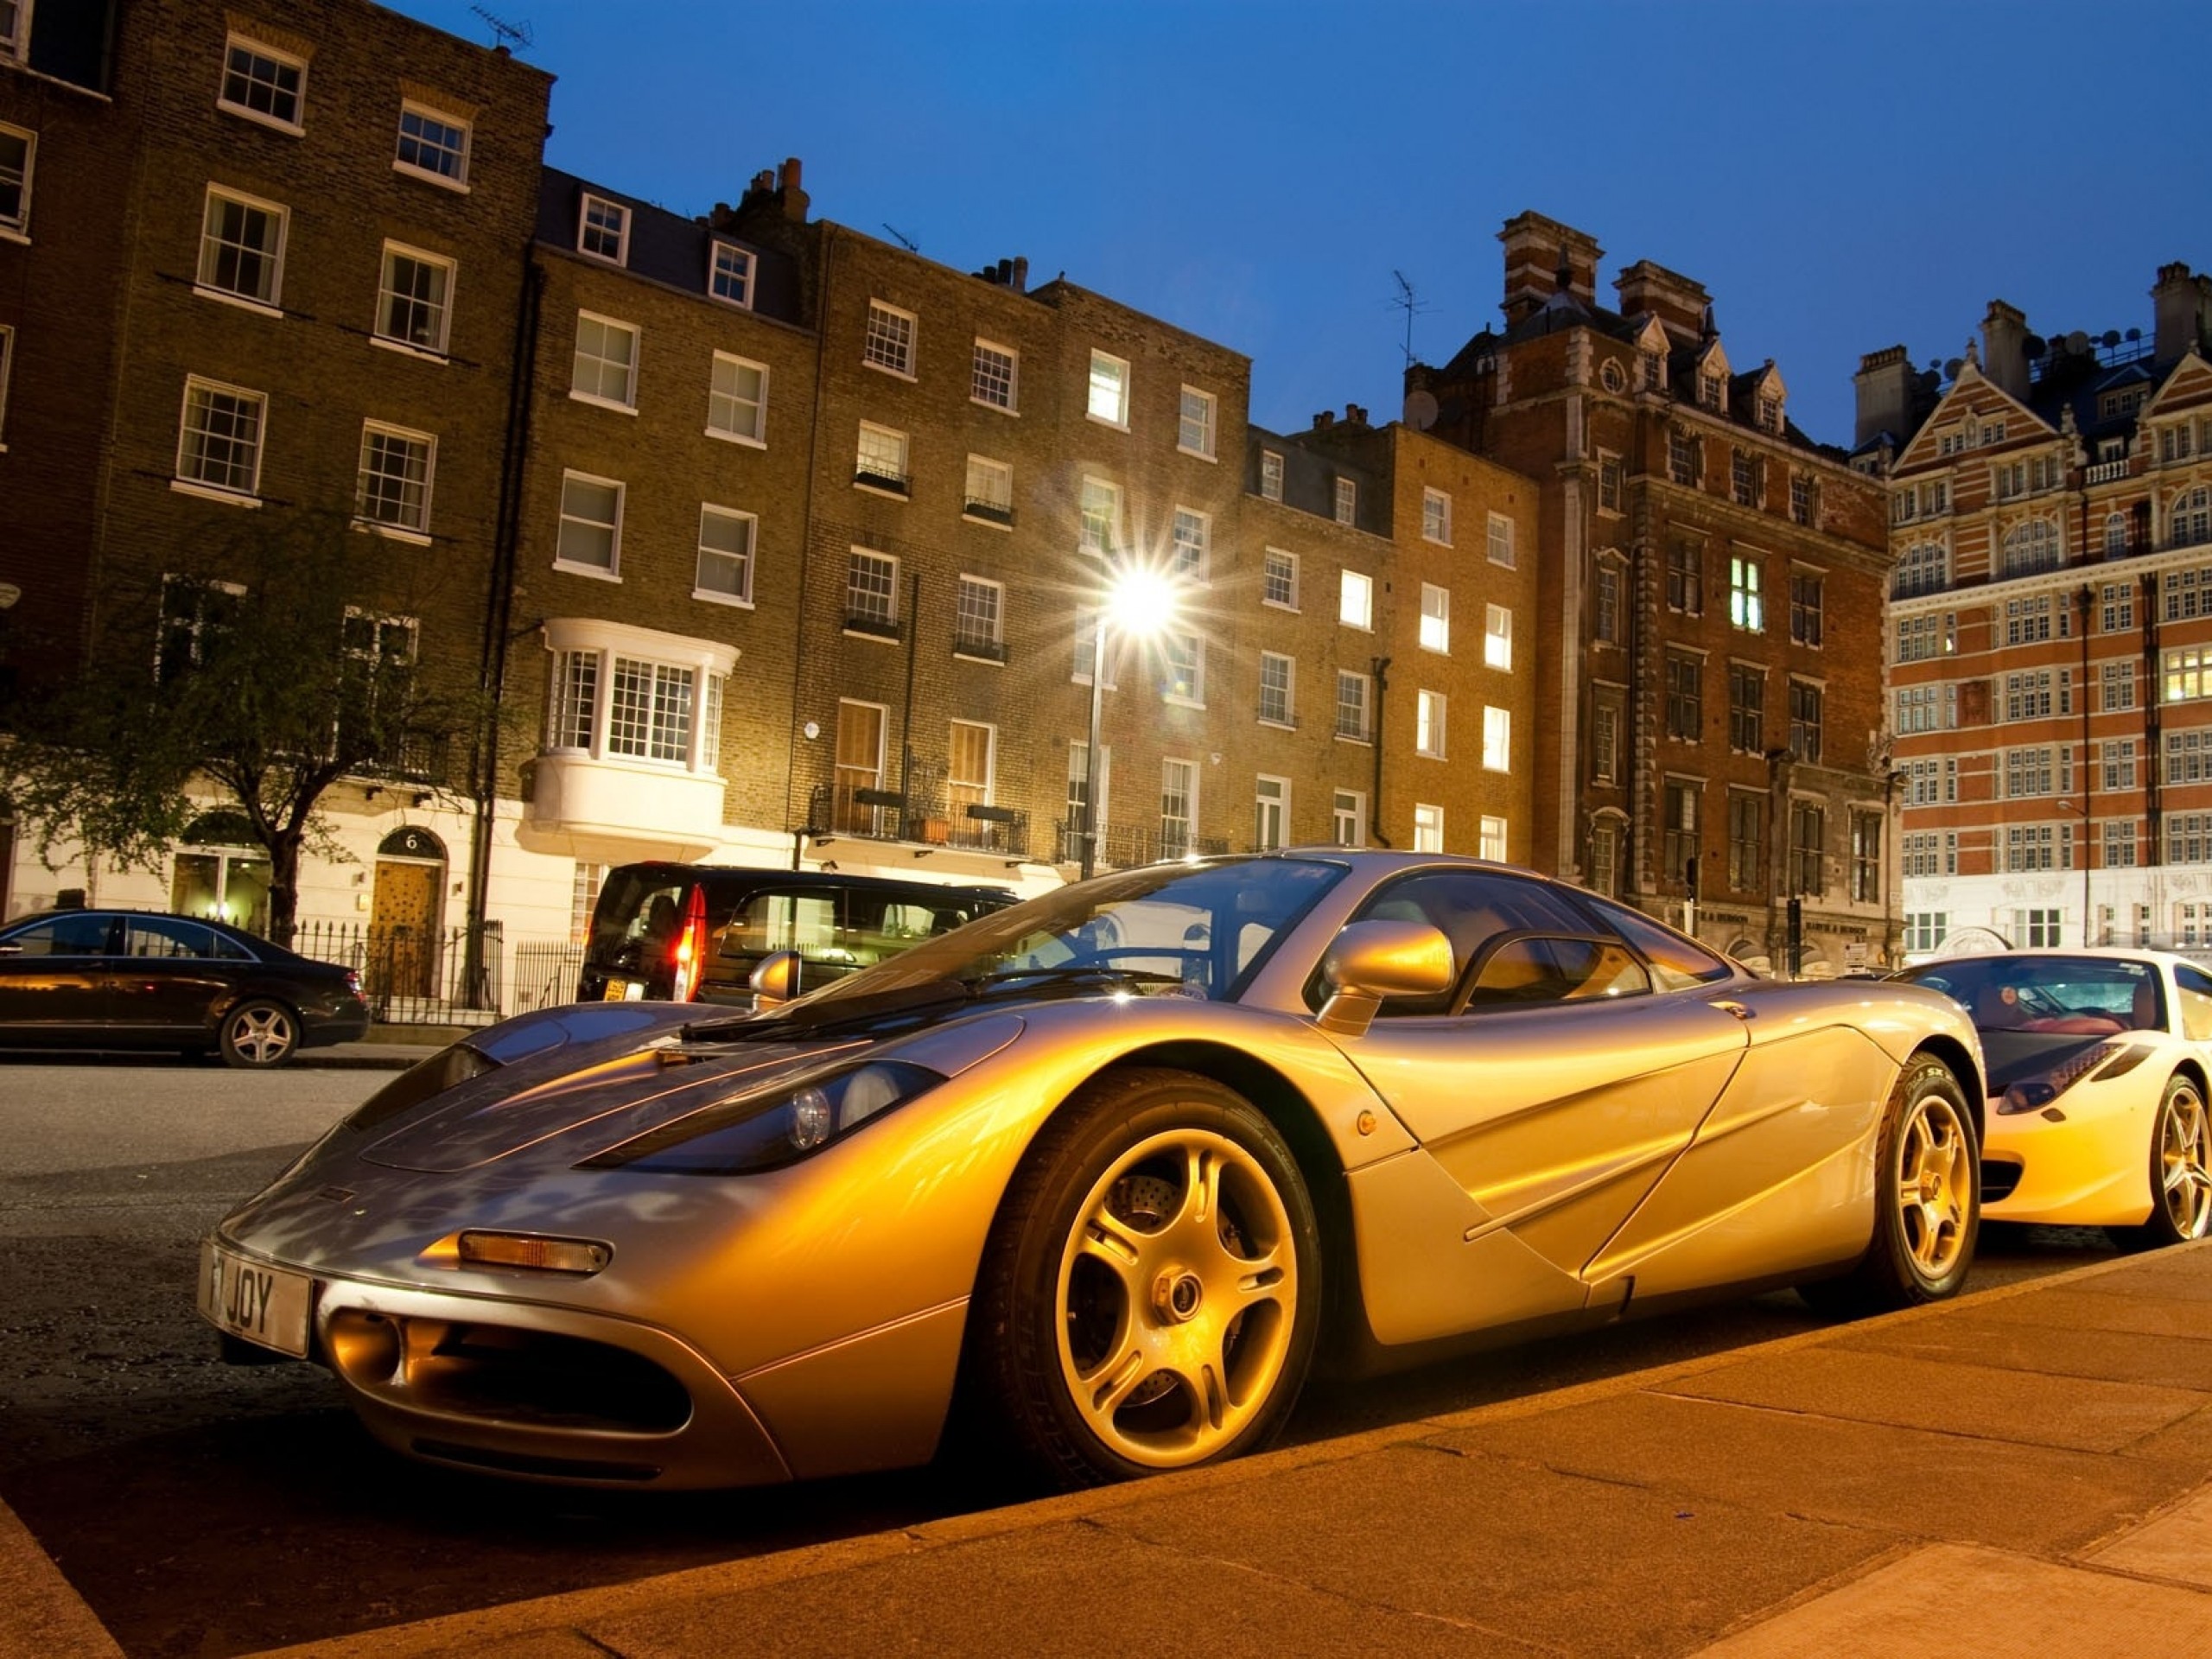 cityscapes, Streets, Cars, Vehicles, Mclaren, F1, Citylights Wallpaper